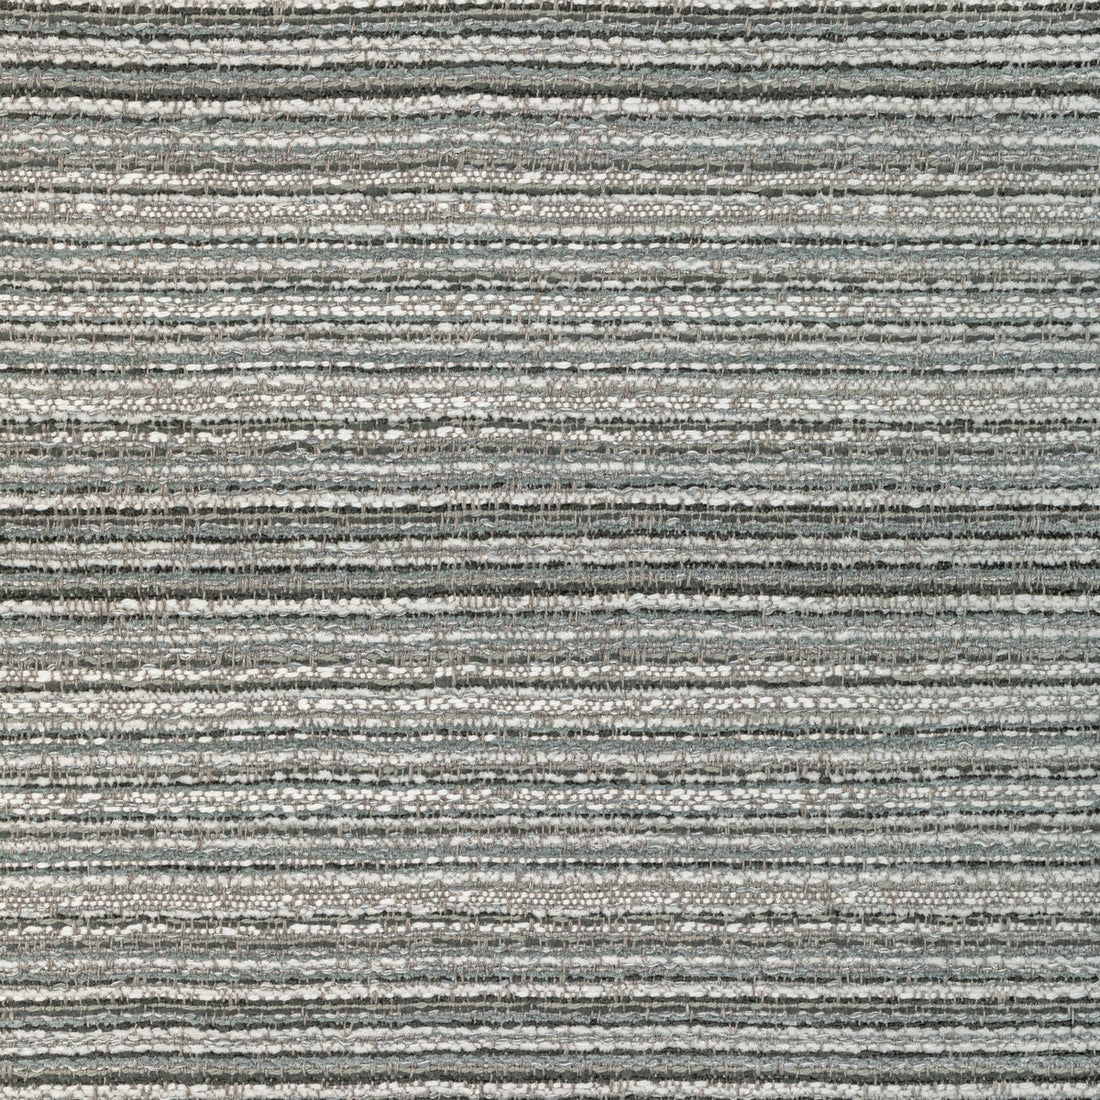 Kravet Design fabric in 36412-1101 color - pattern 36412.1101.0 - by Kravet Design in the Performance Crypton Home collection